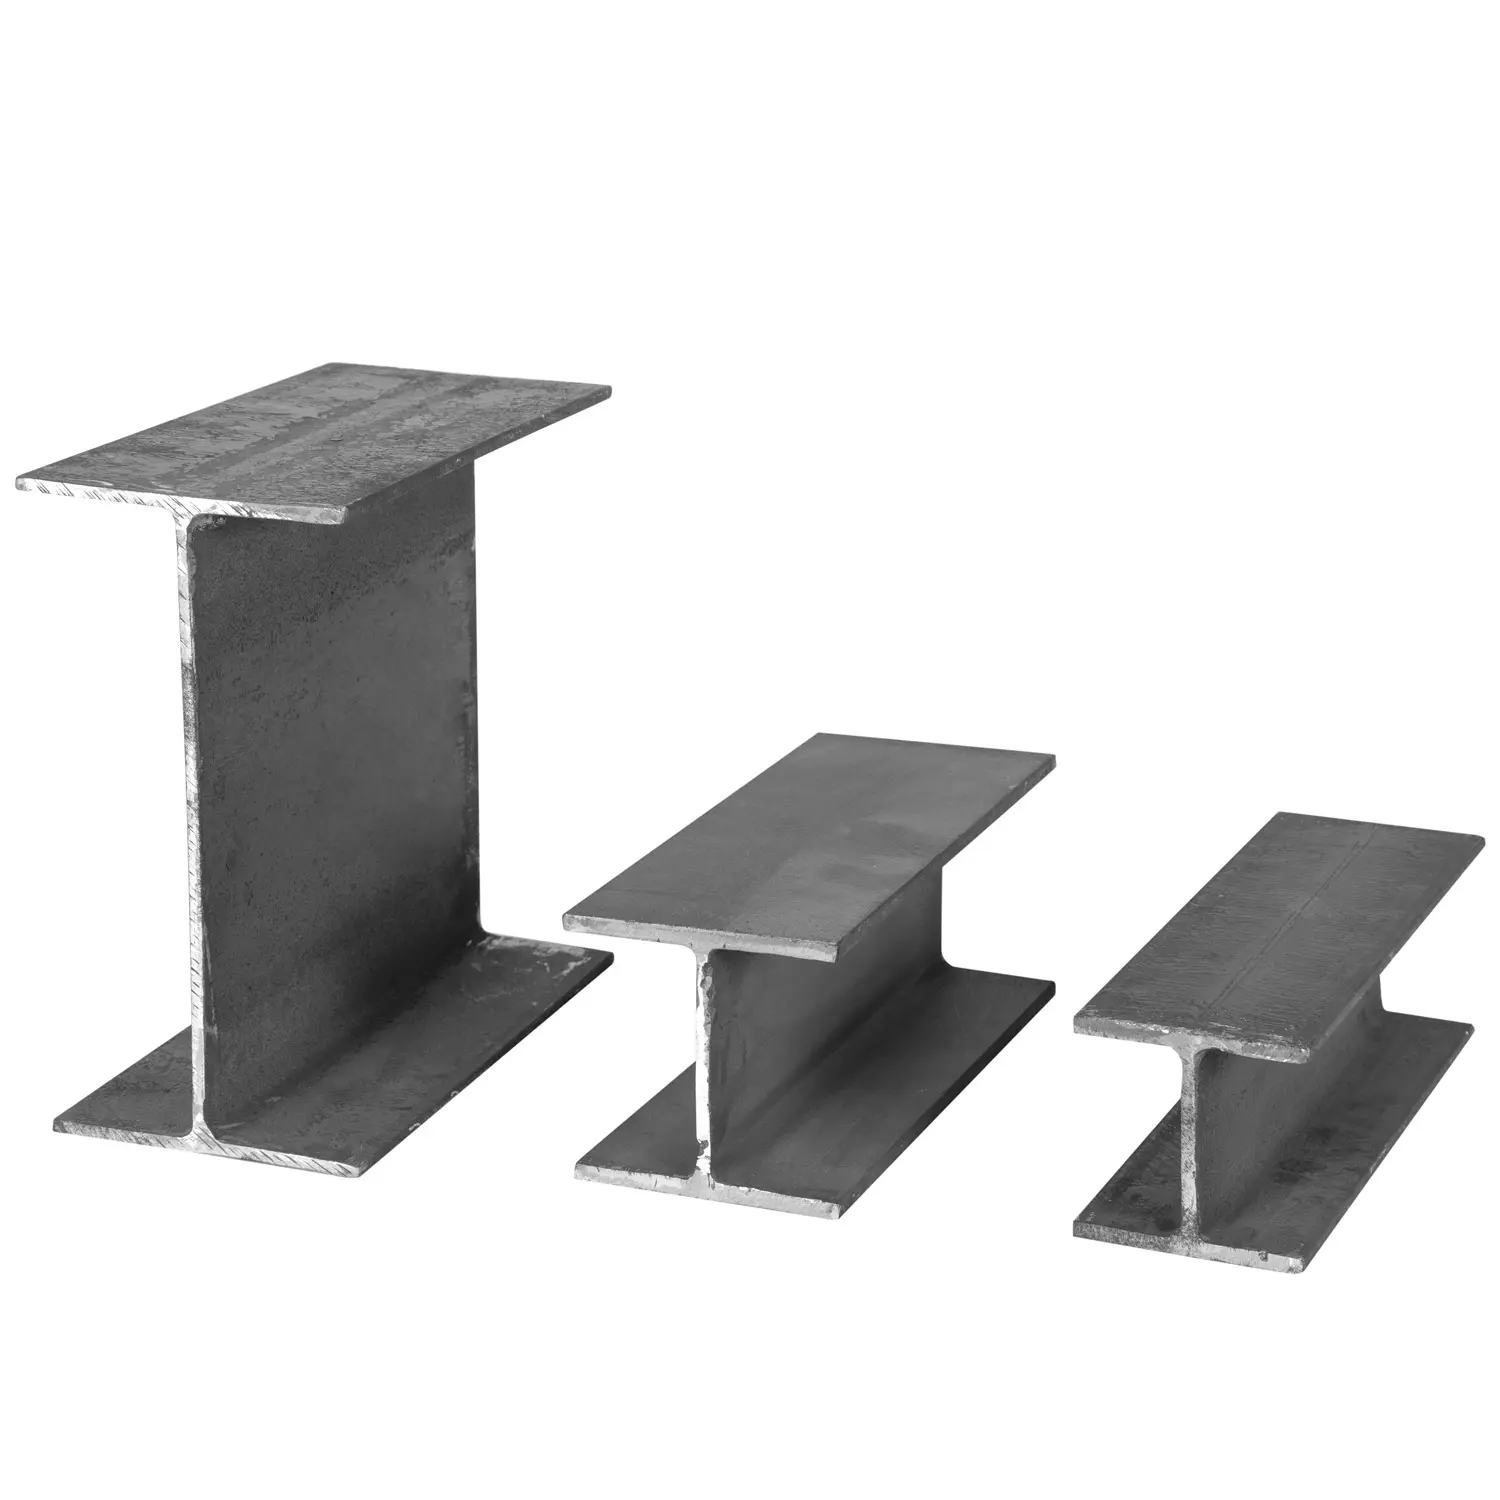 China Steel Beams i structural china beams sizes channel beam steel